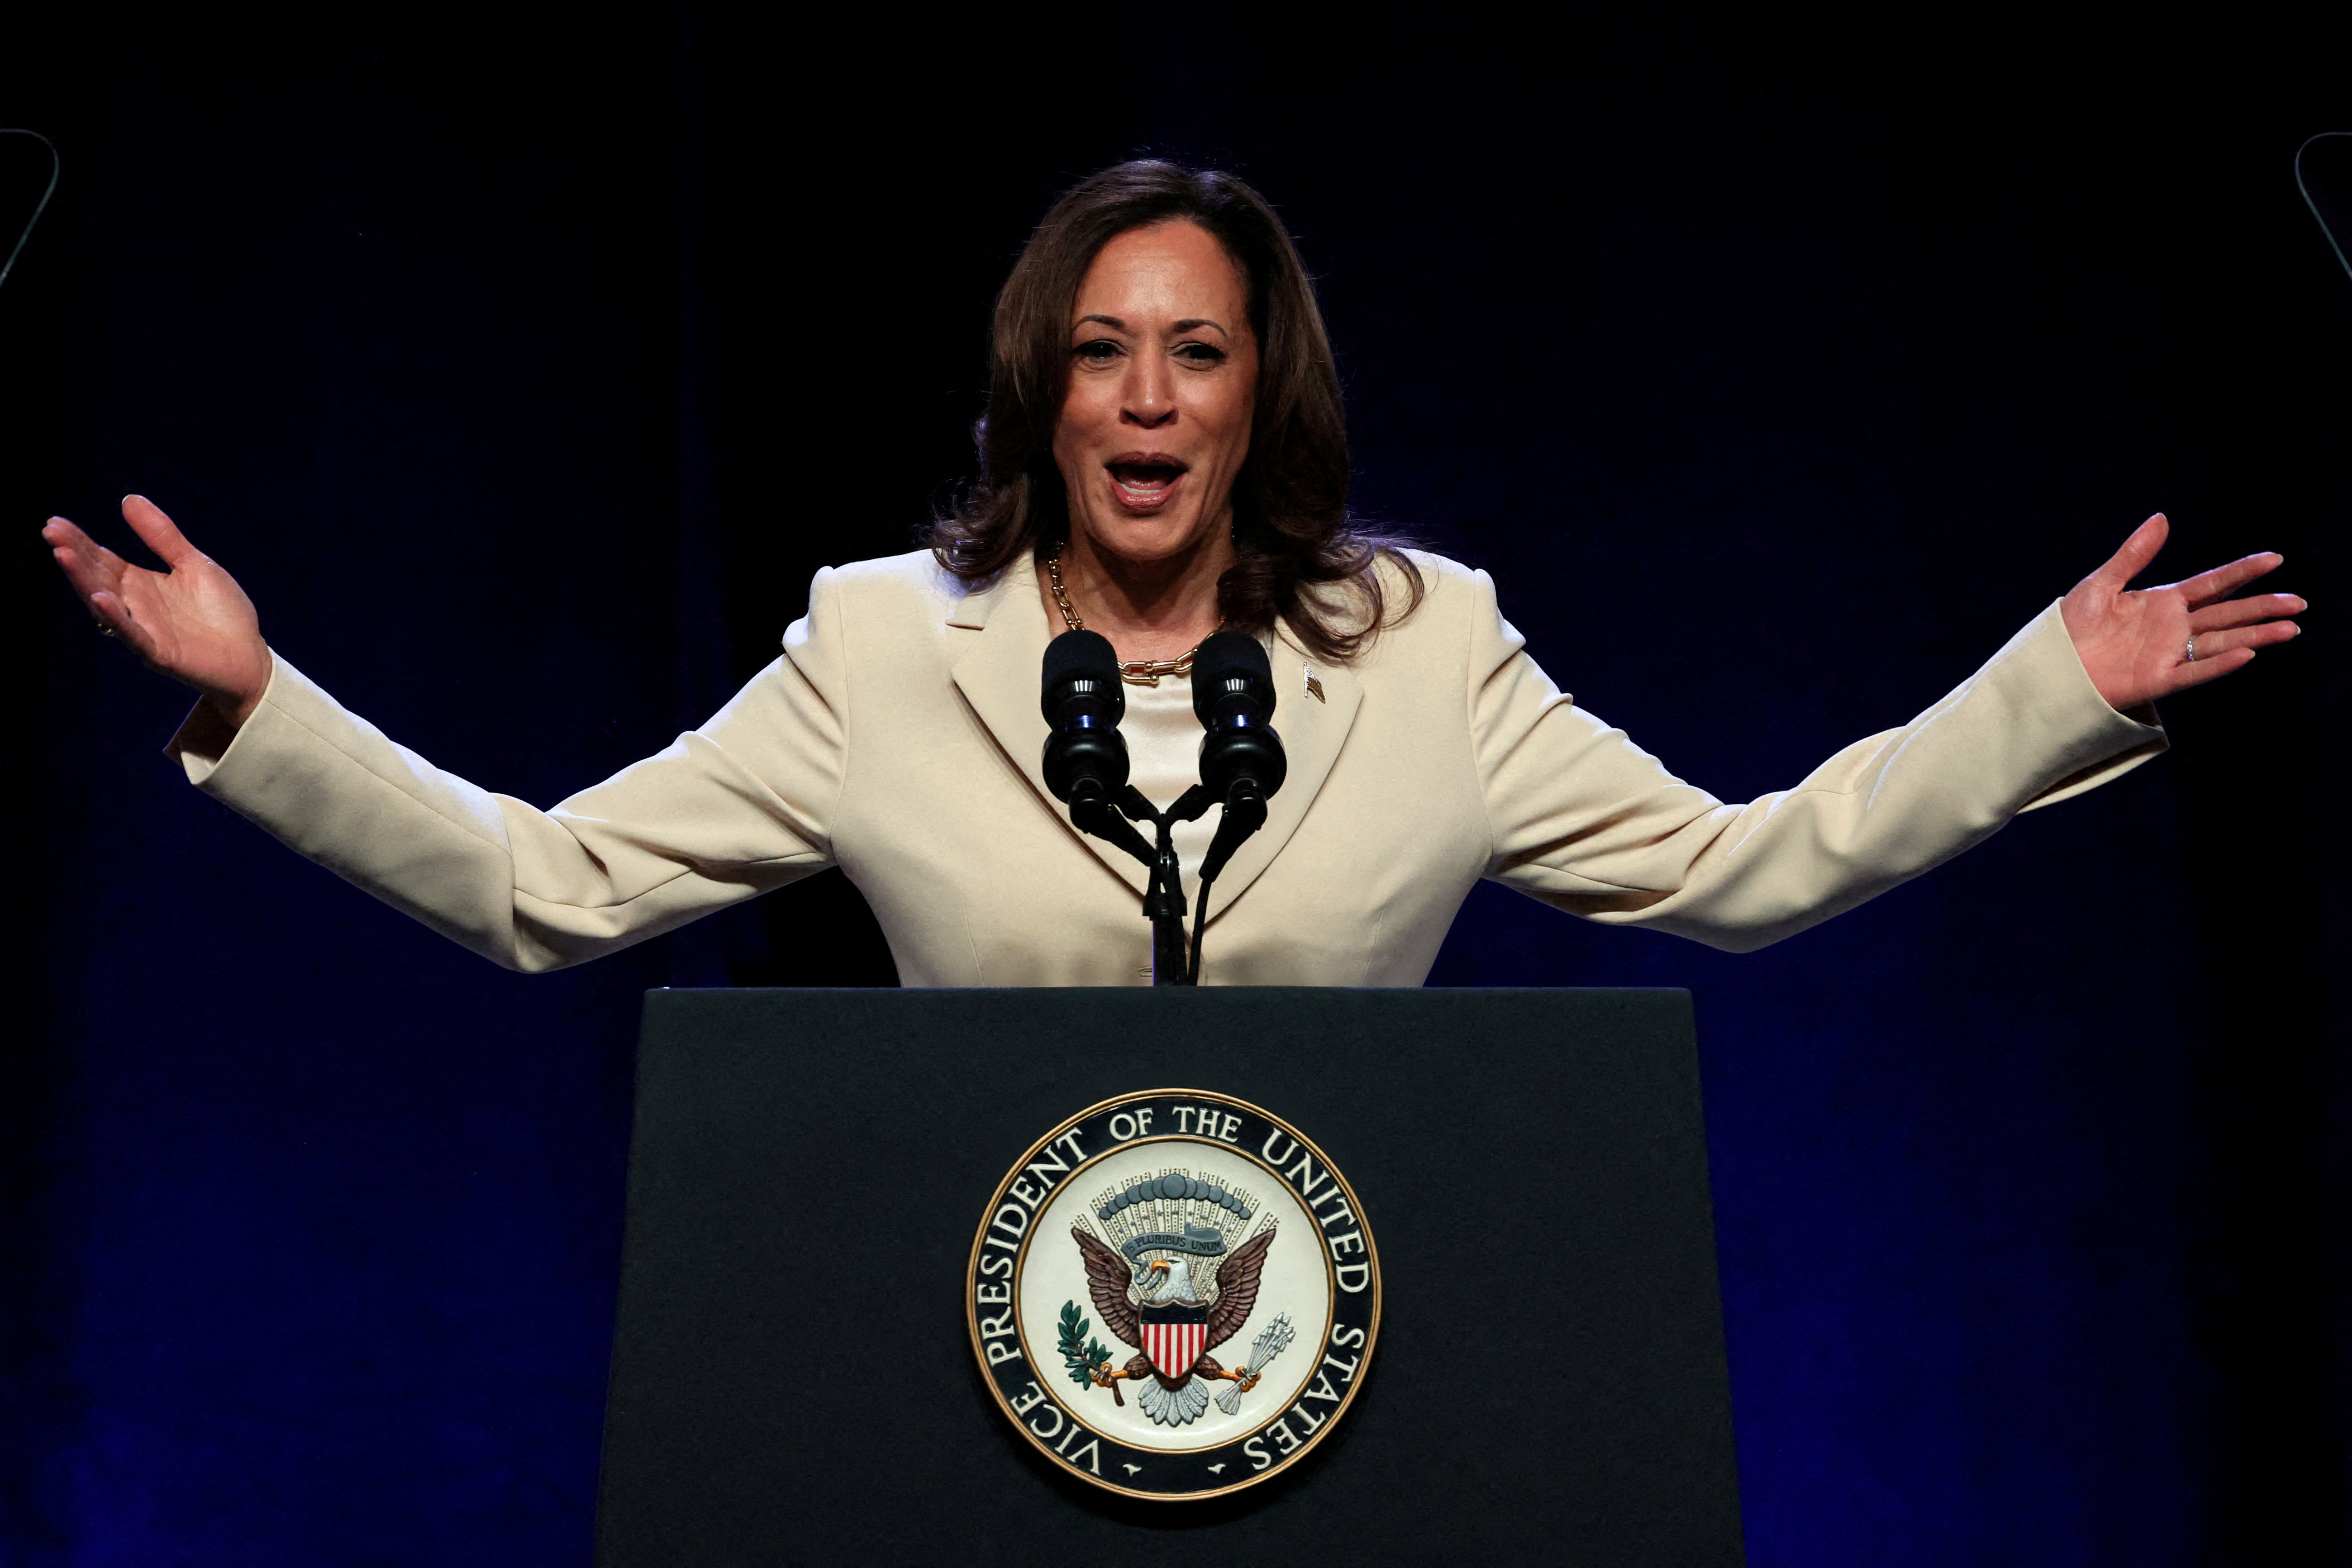 U.S. Vice President Kamala Harris speaks during the Constitutional Convention of UNITE HERE in New York